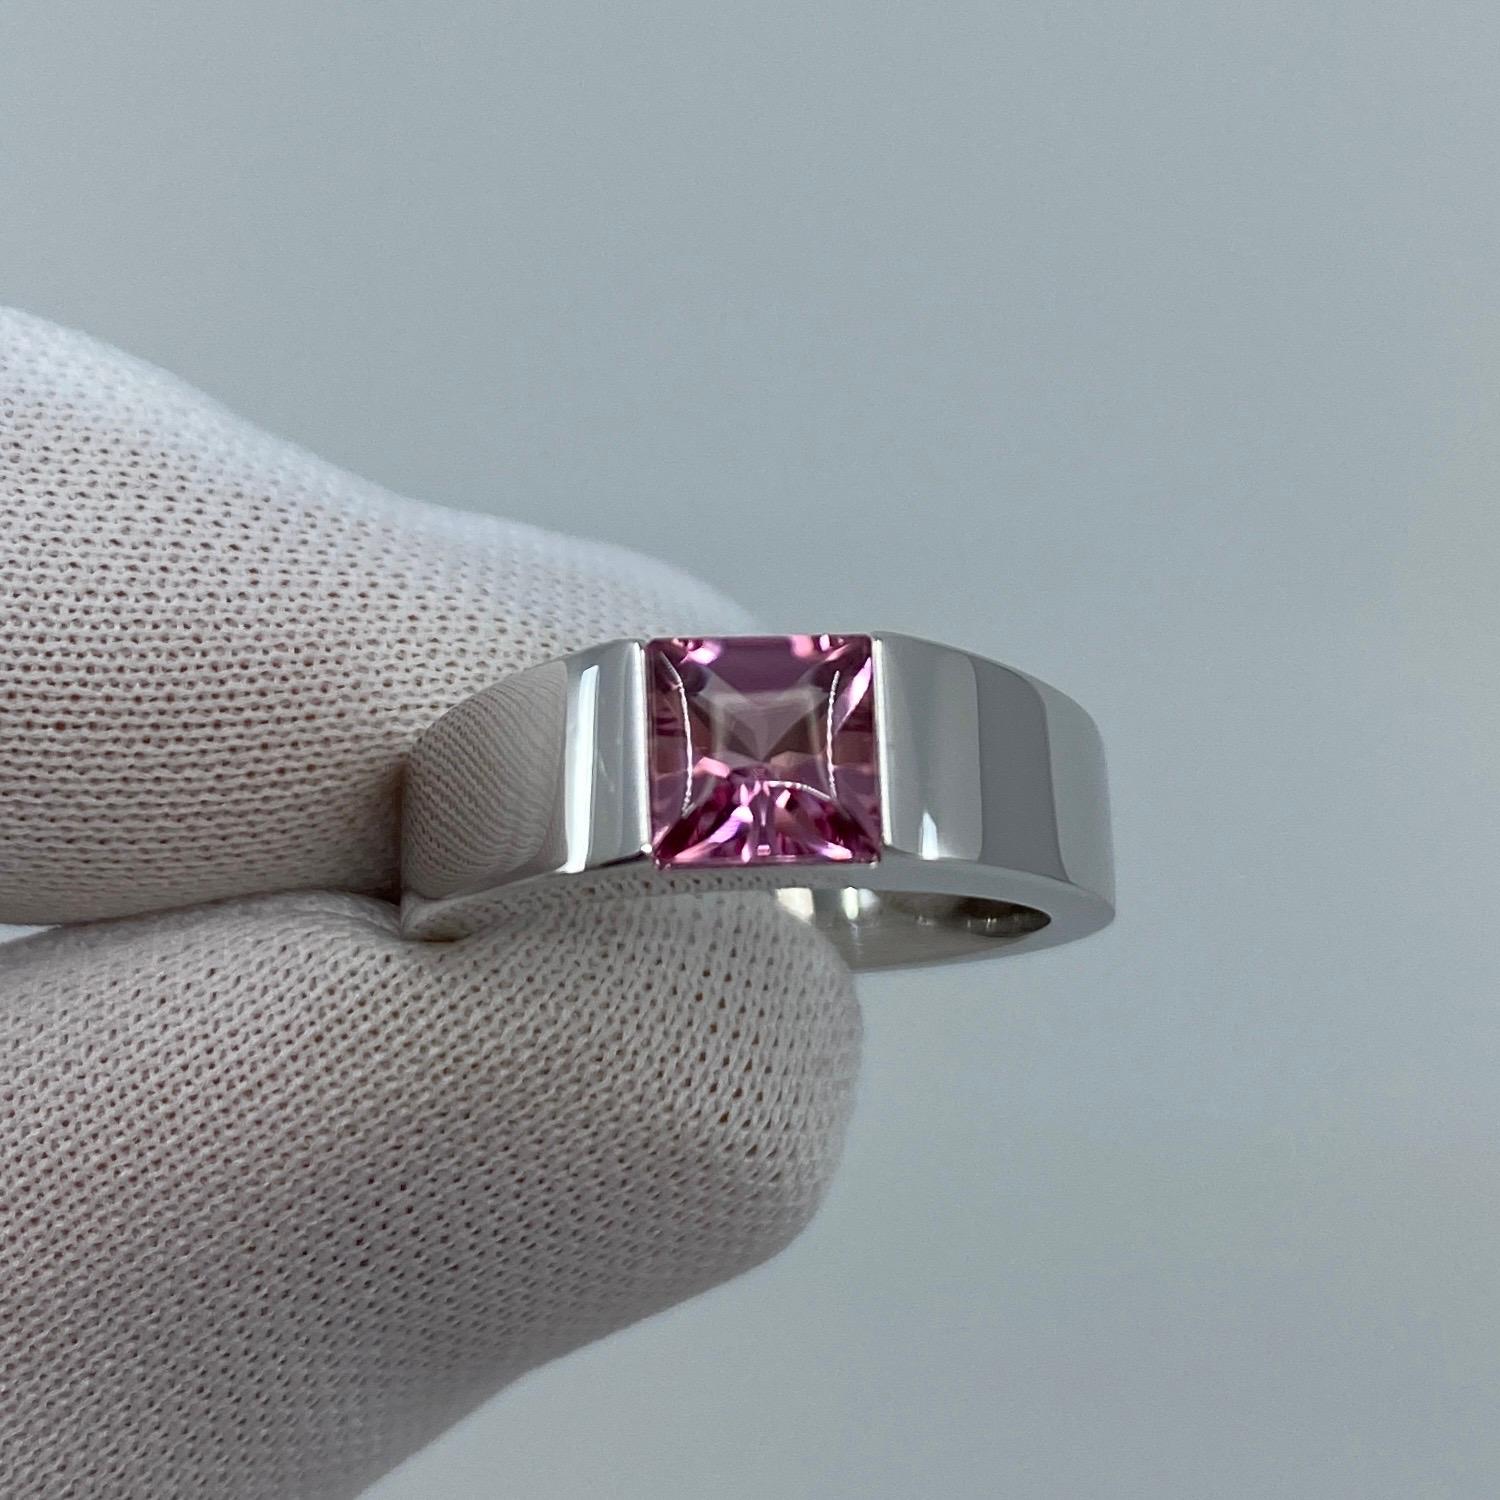 Vintage Cartier Pink Tourmaline 18 Karat White Gold Tank Ring.

Stunning white gold ring with a 5.8mm tension set bright pink fancy-cut tourmaline. Fine jewellery houses like Cartier only use the finest of gemstones and this tourmaline is no